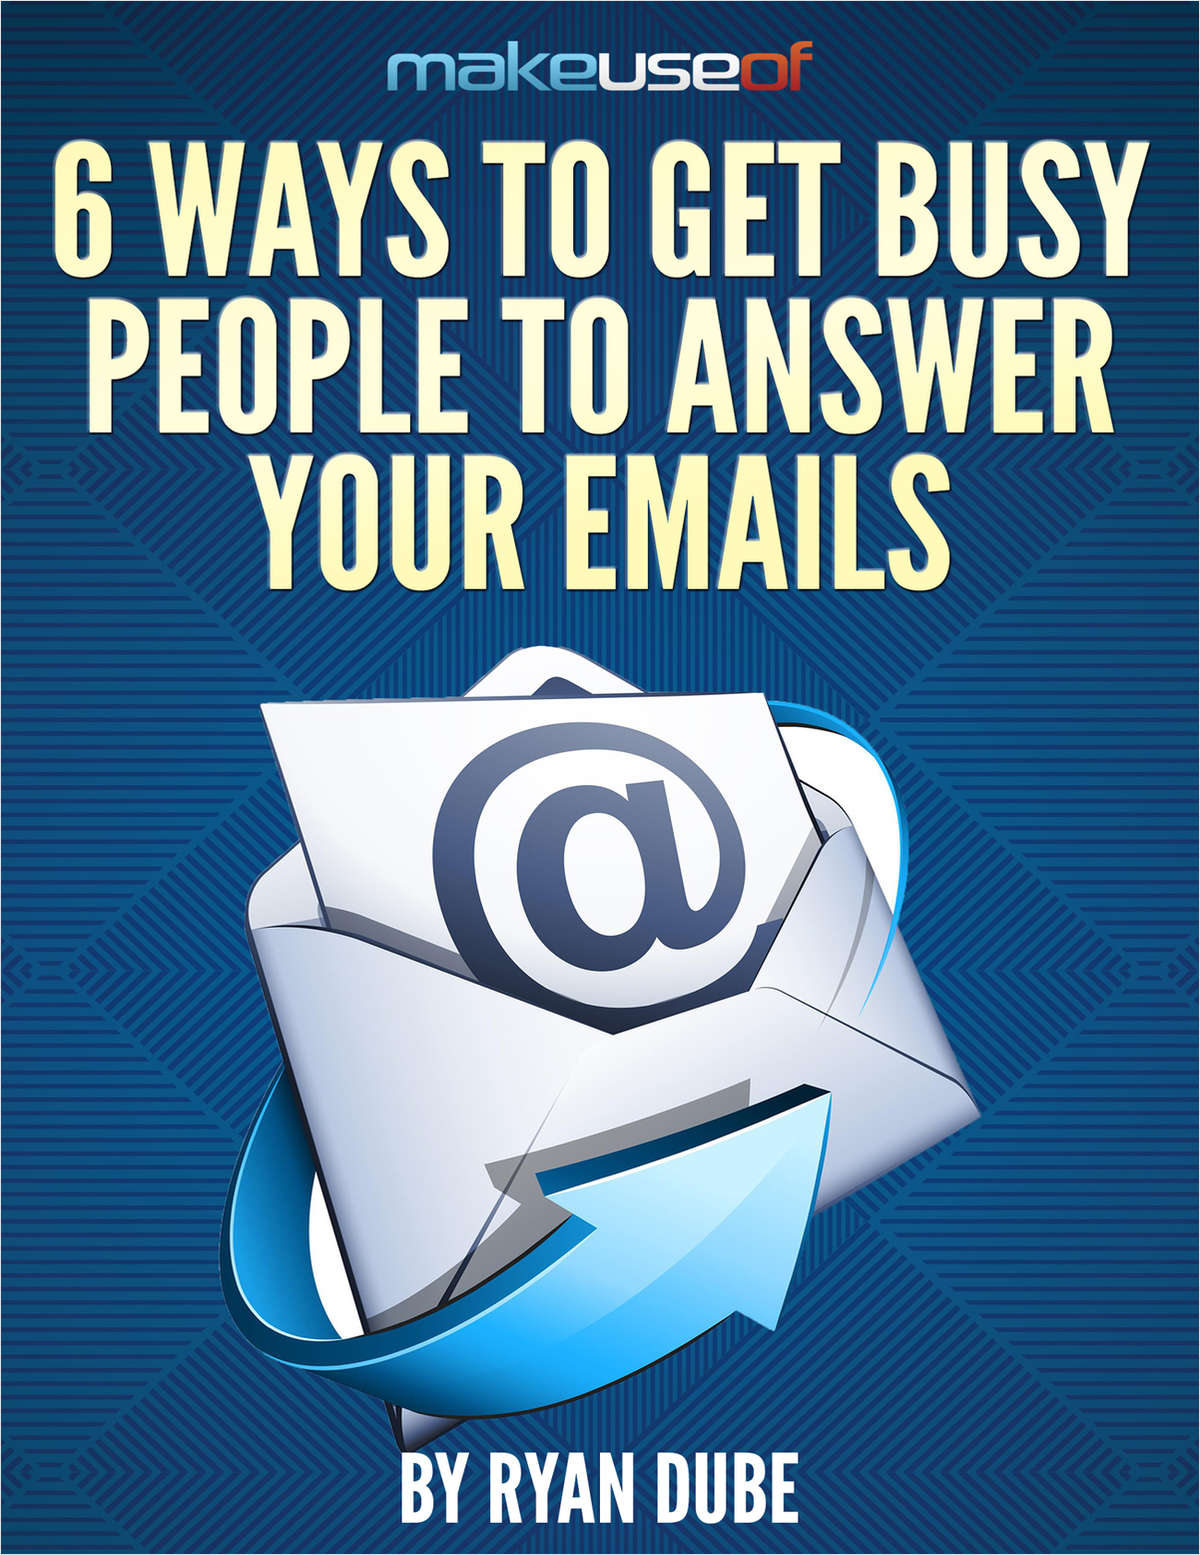 6 Ways To Get Busy People To Answer Your Emails